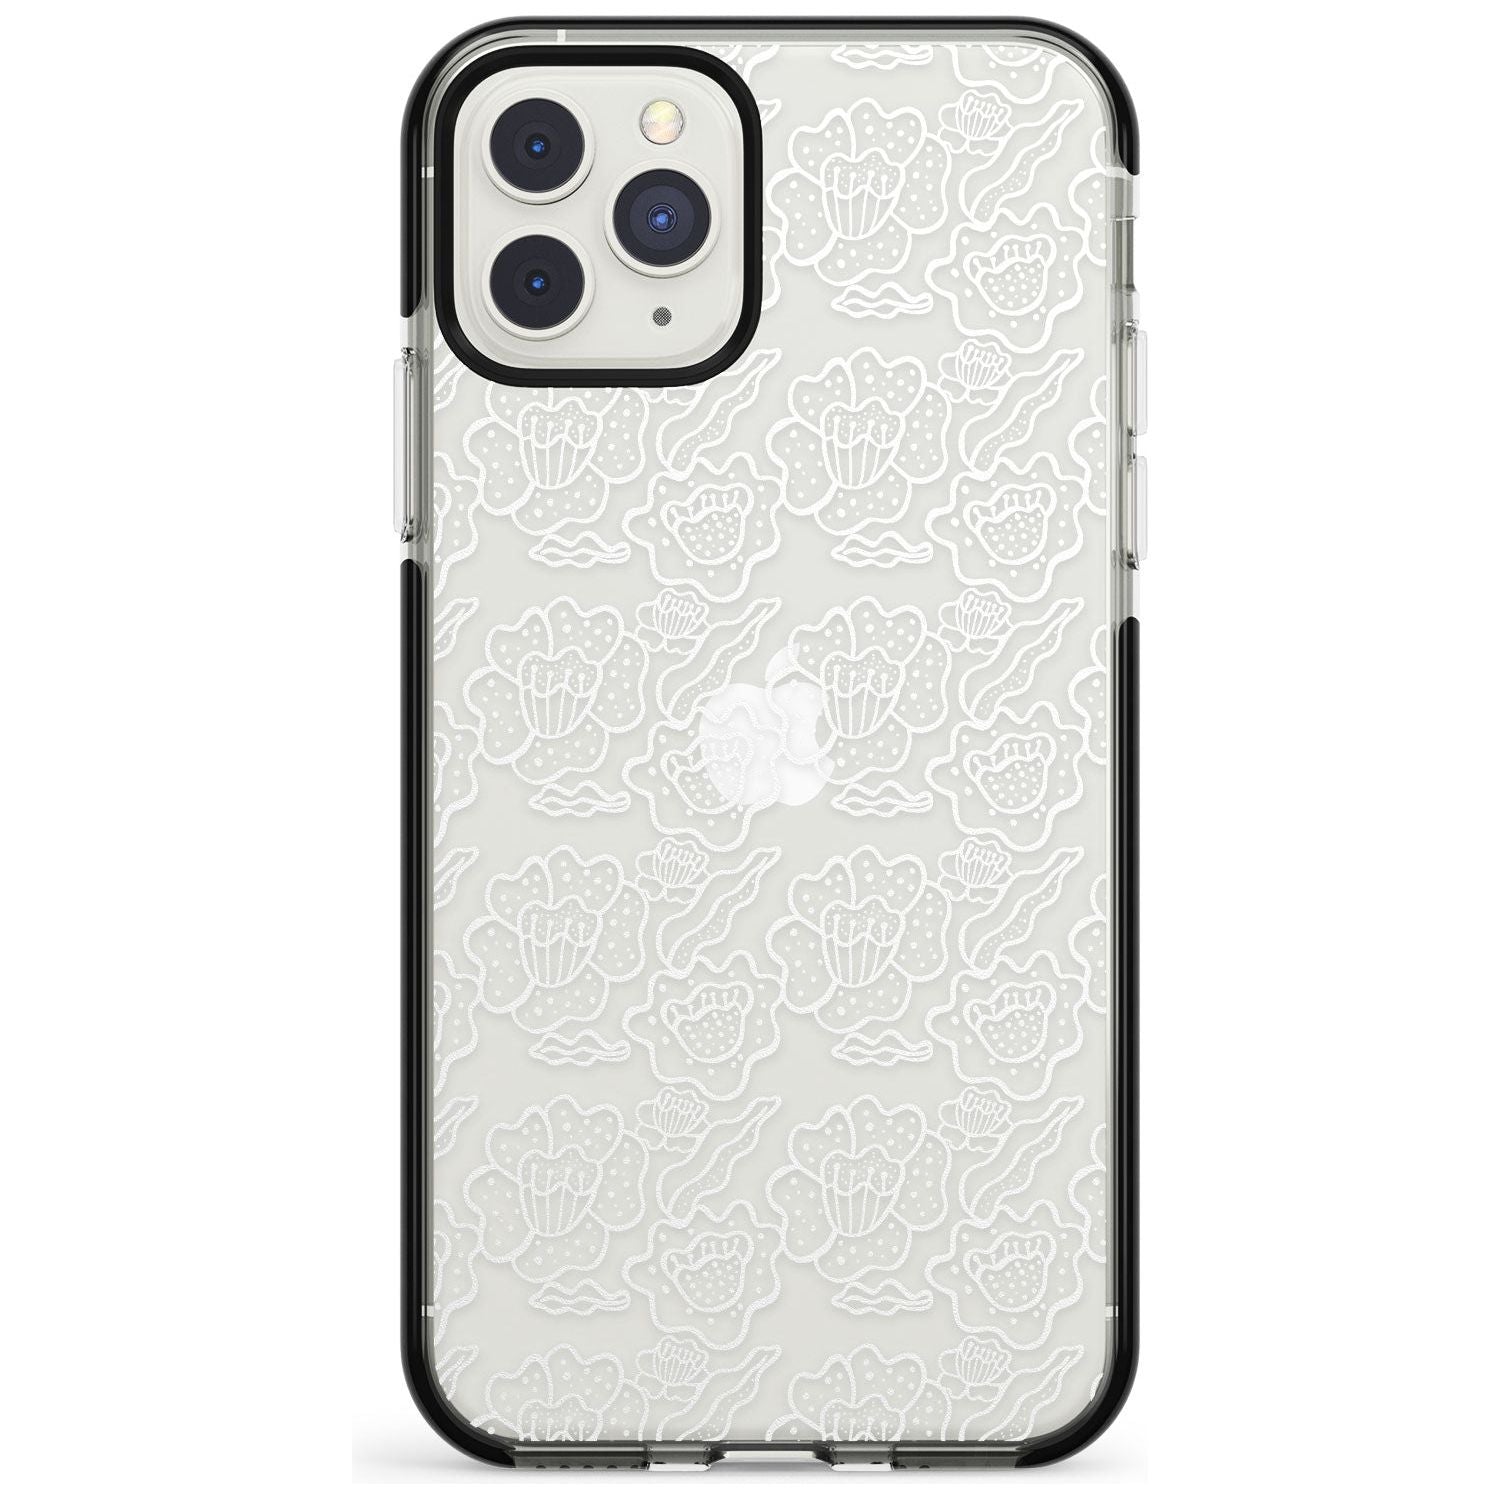 Funky Floral Patterns White on Clear Black Impact Phone Case for iPhone 11 Pro Max